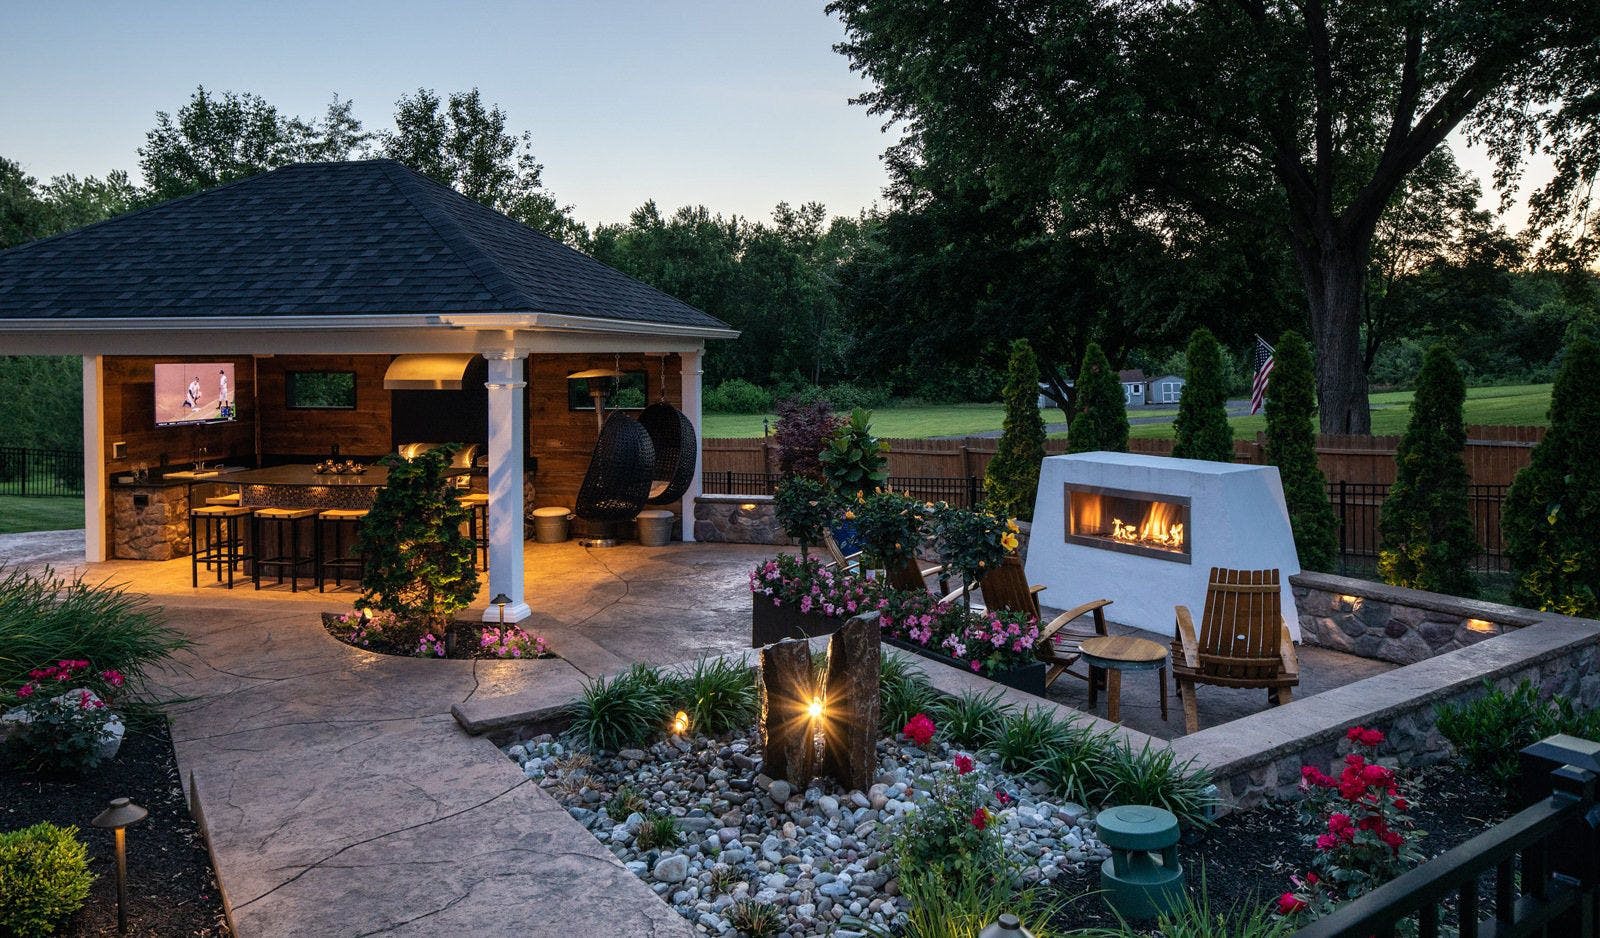 A wider look at the outdoor living space